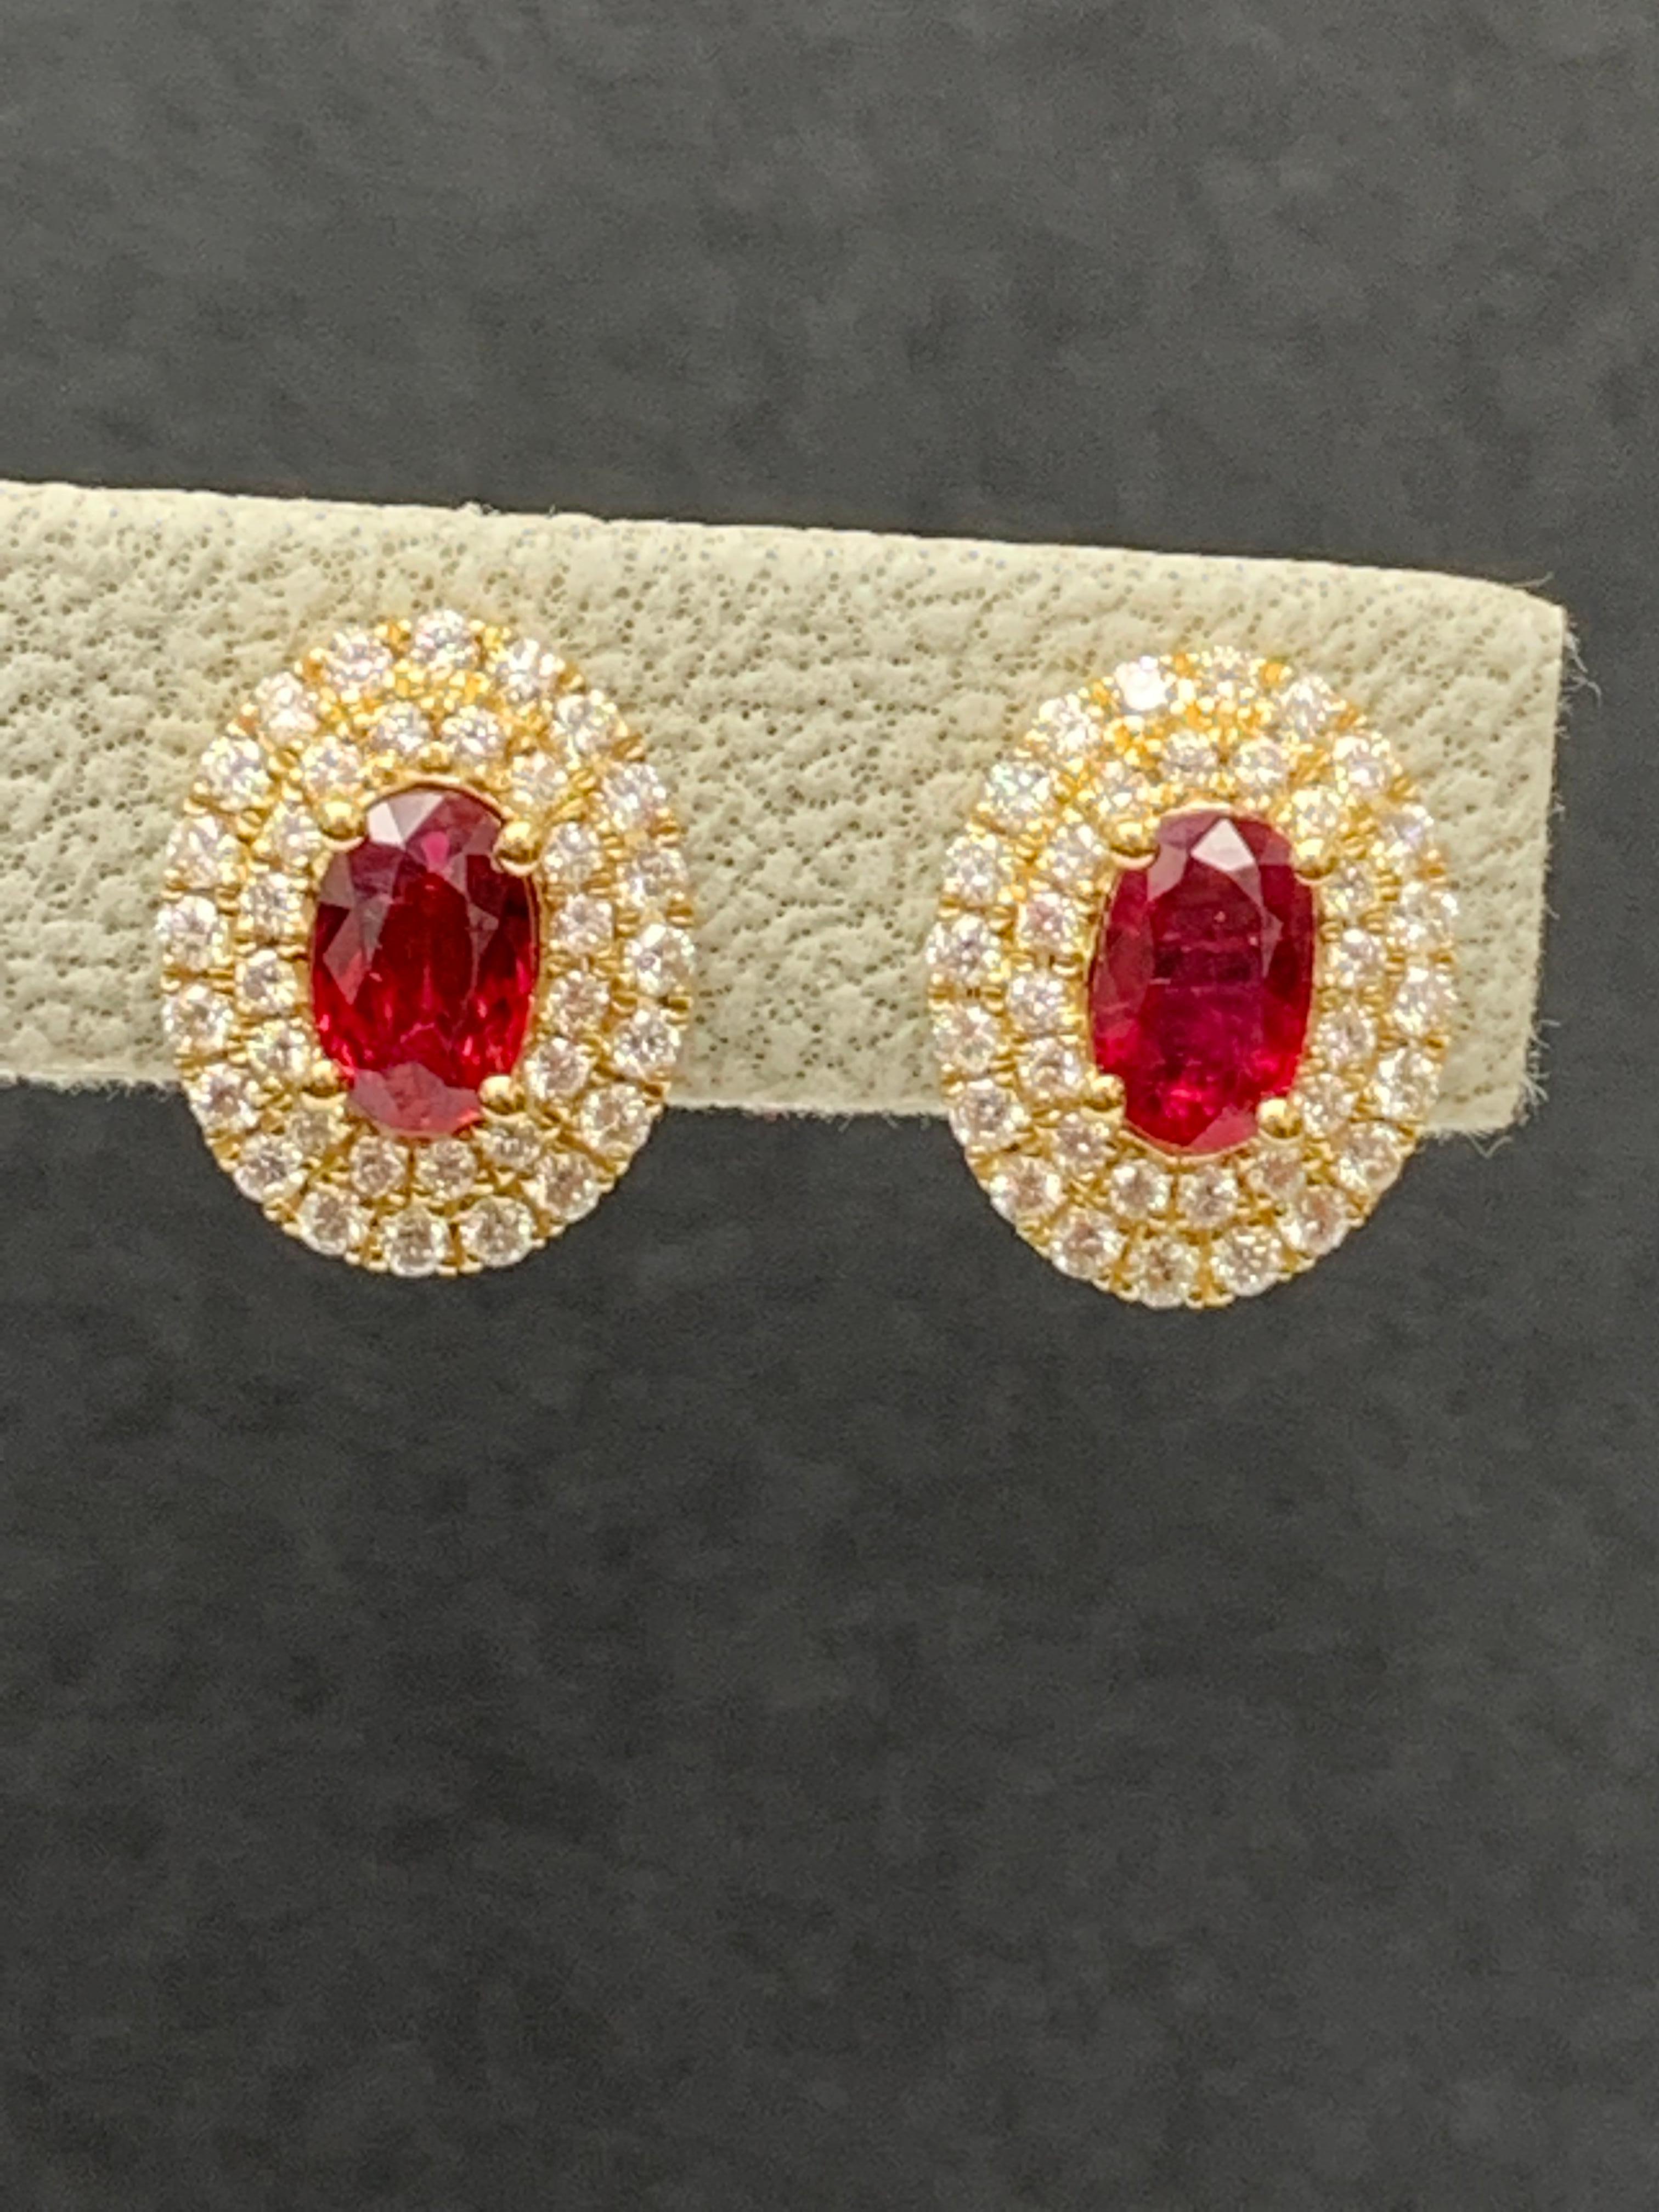 0.98 Carat Oval Cut Ruby and Diamond Stud Earrings in 18K Yellow Gold For Sale 8